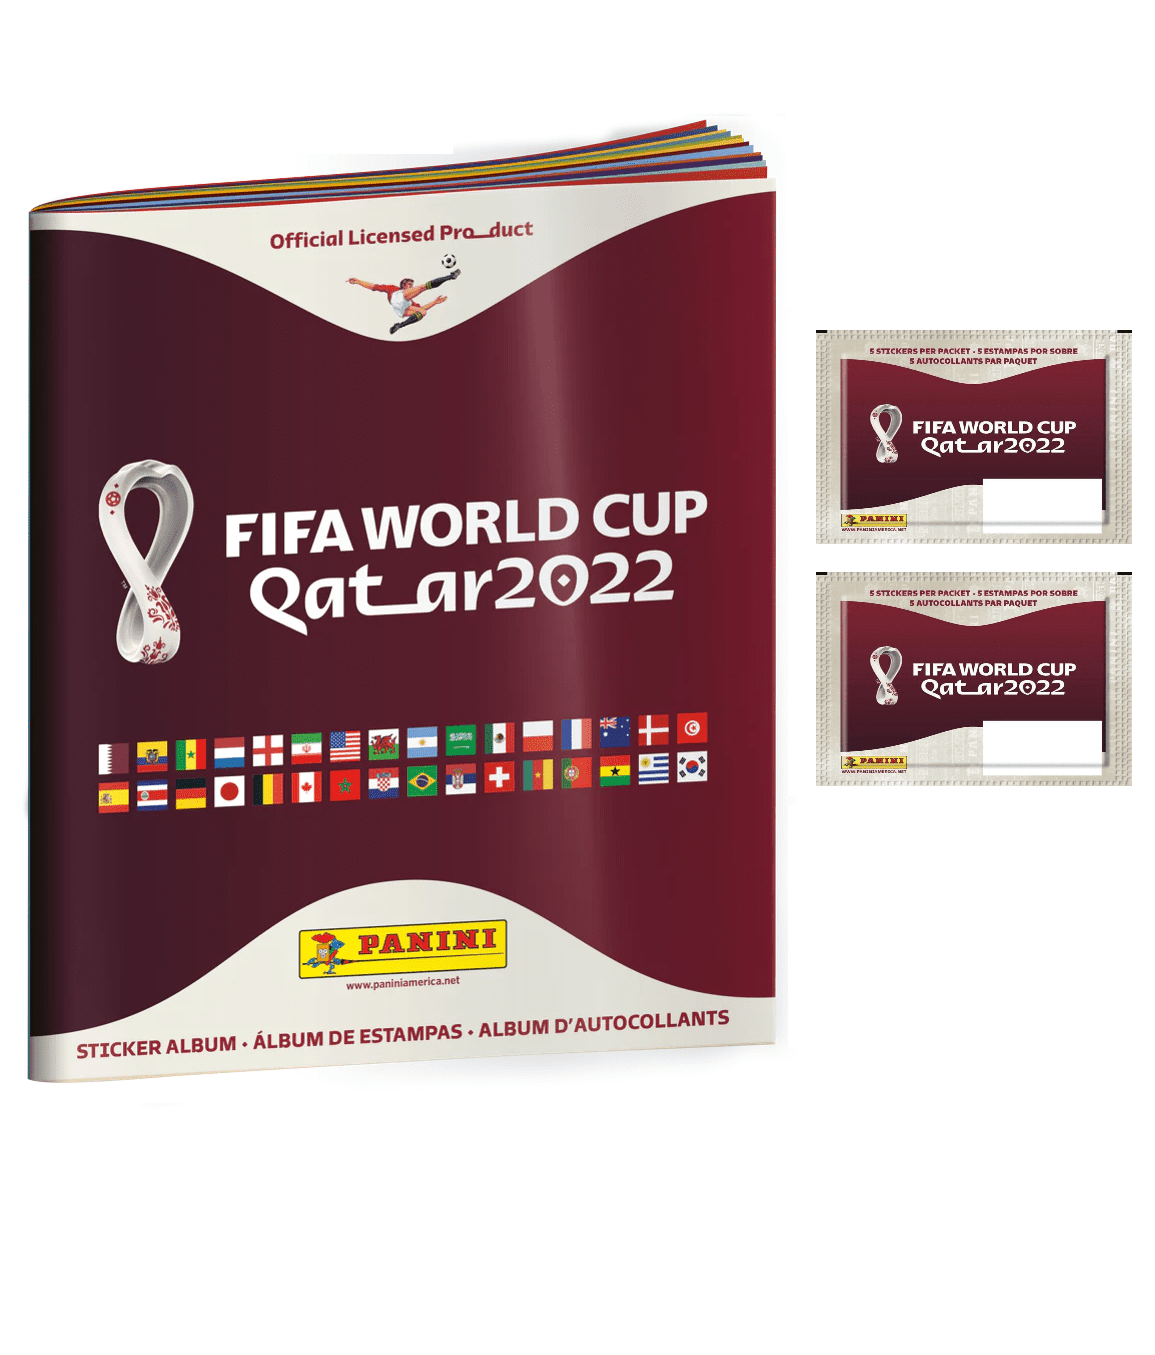 Panini Fifa World Cup Qatar 2022 Album With 2 Sticker Packs Included (Soft  Cover) 